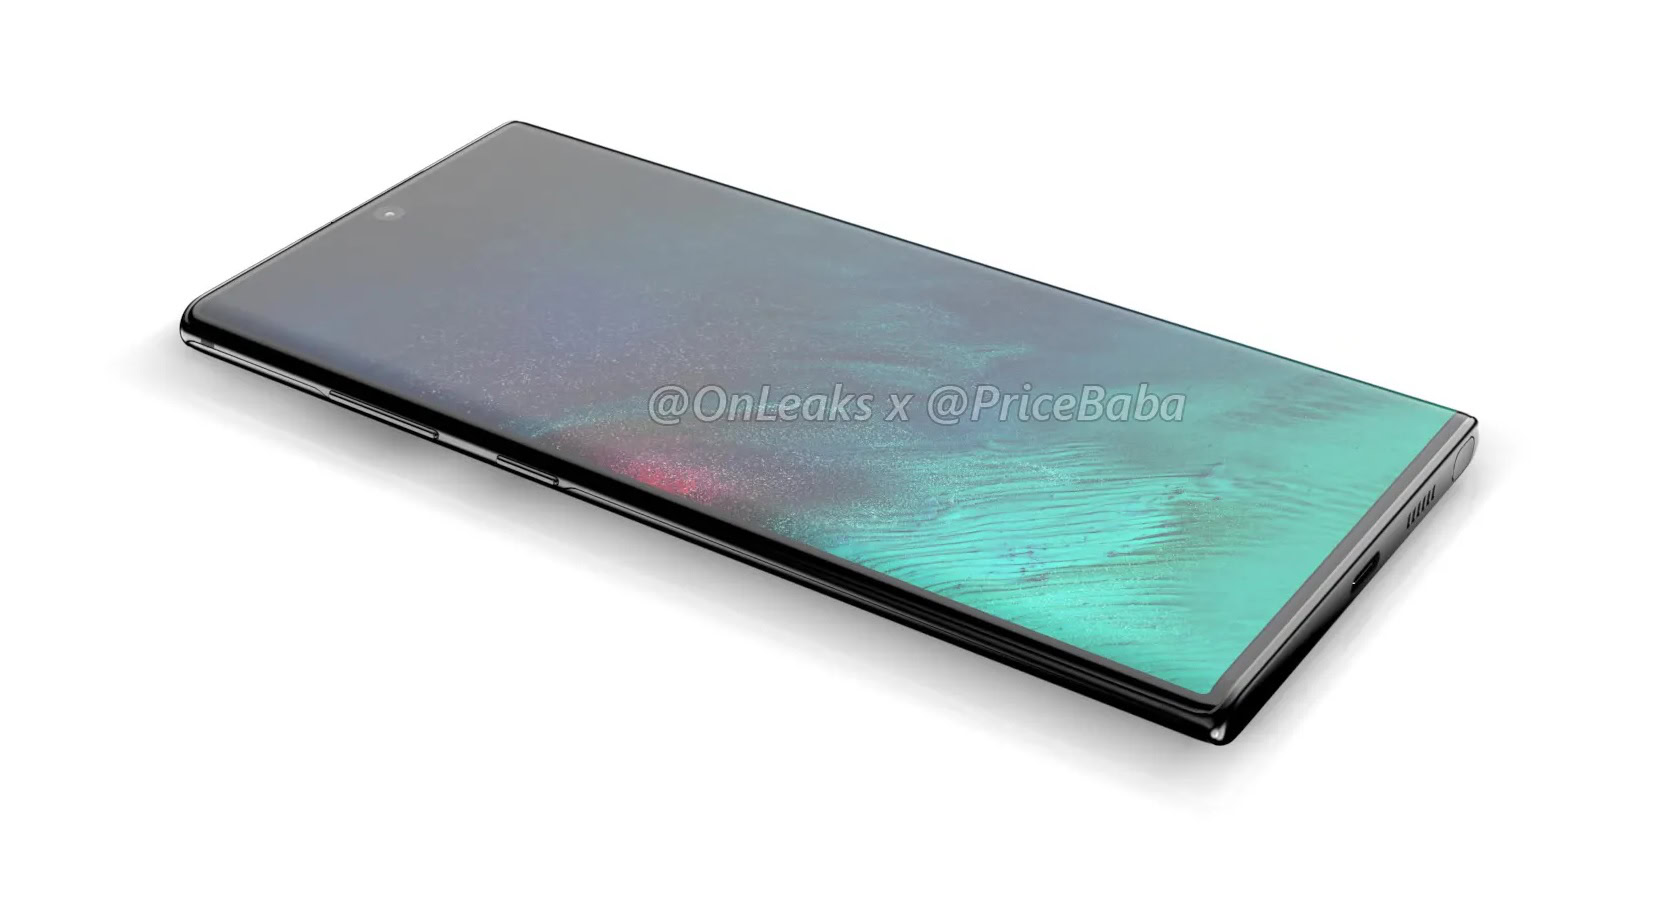 Samsung Galaxy Note 10 Pro looks jaw-droppingly beautiful in these